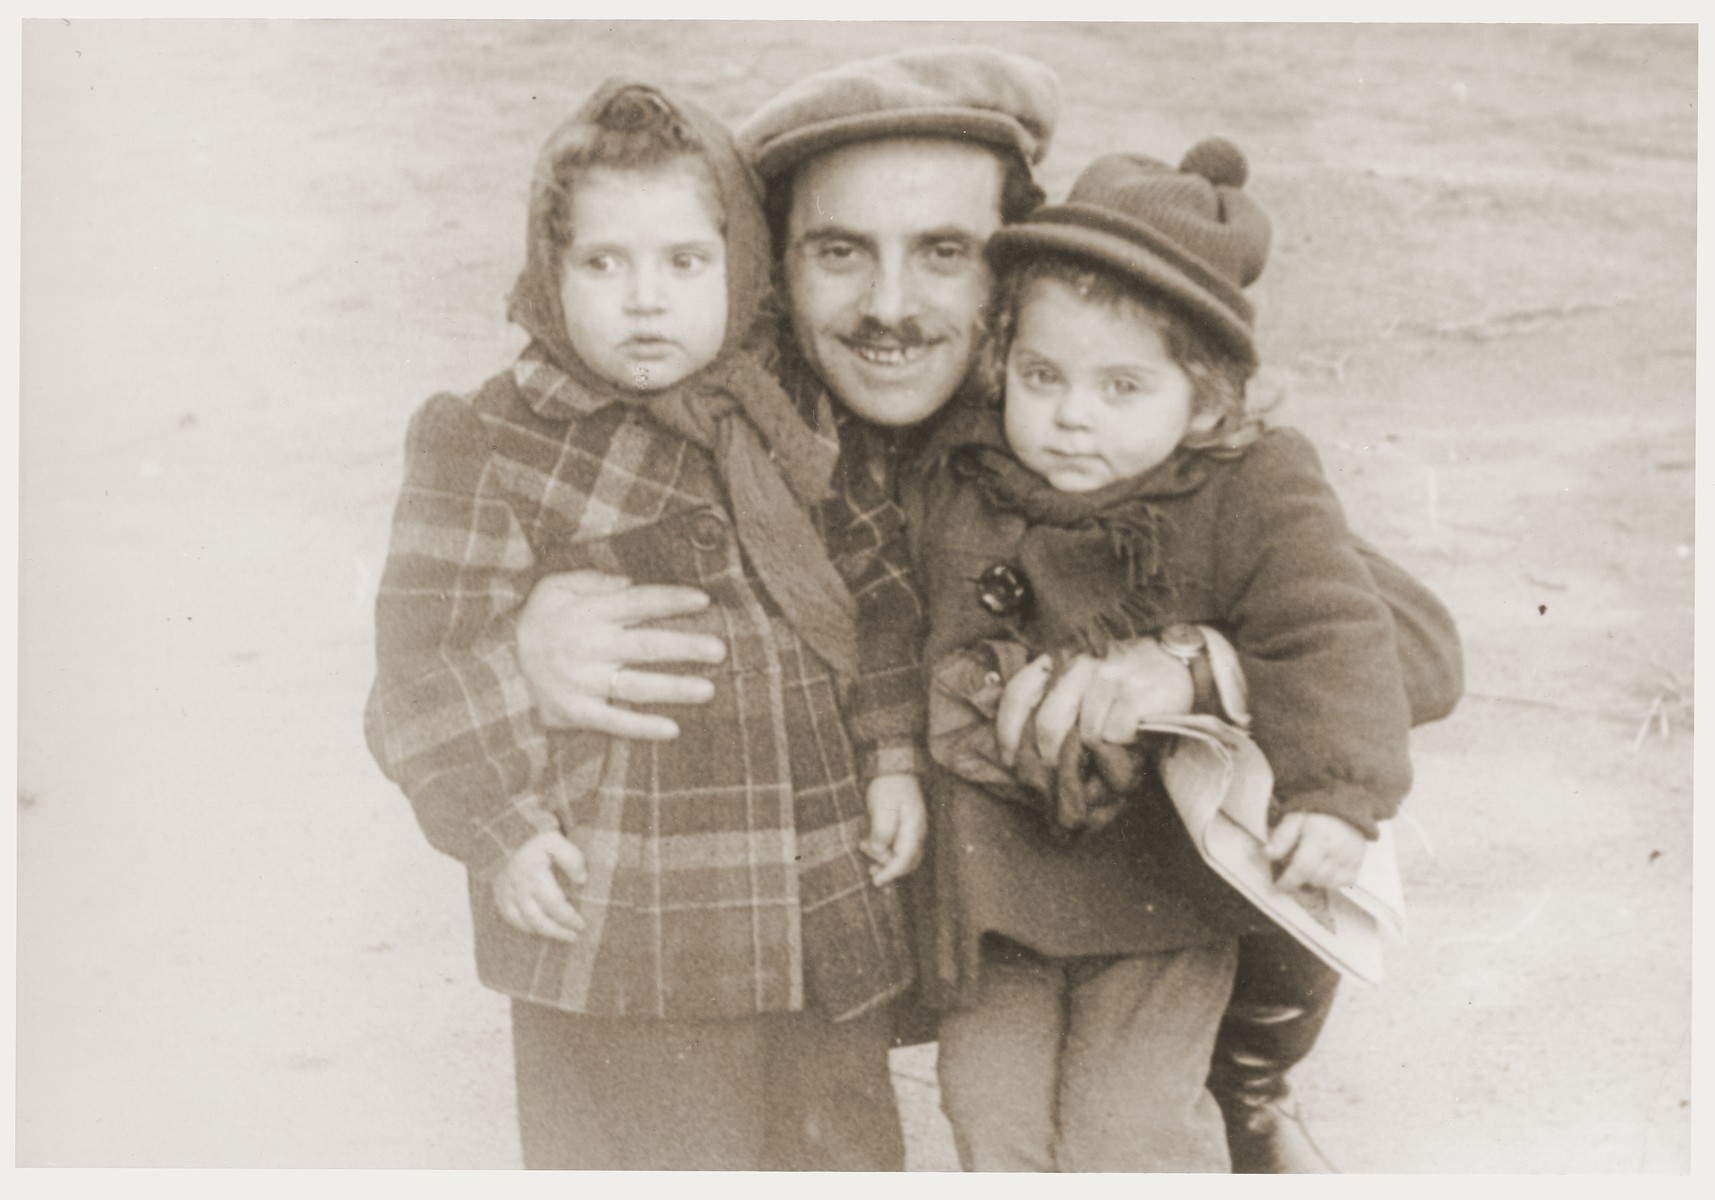 Noach Miedzinski poses with his niece (left) and daughter Nili (right) at the Kibbutz Nili hachshara (Zionist collective) in Pleikershof, Germany.